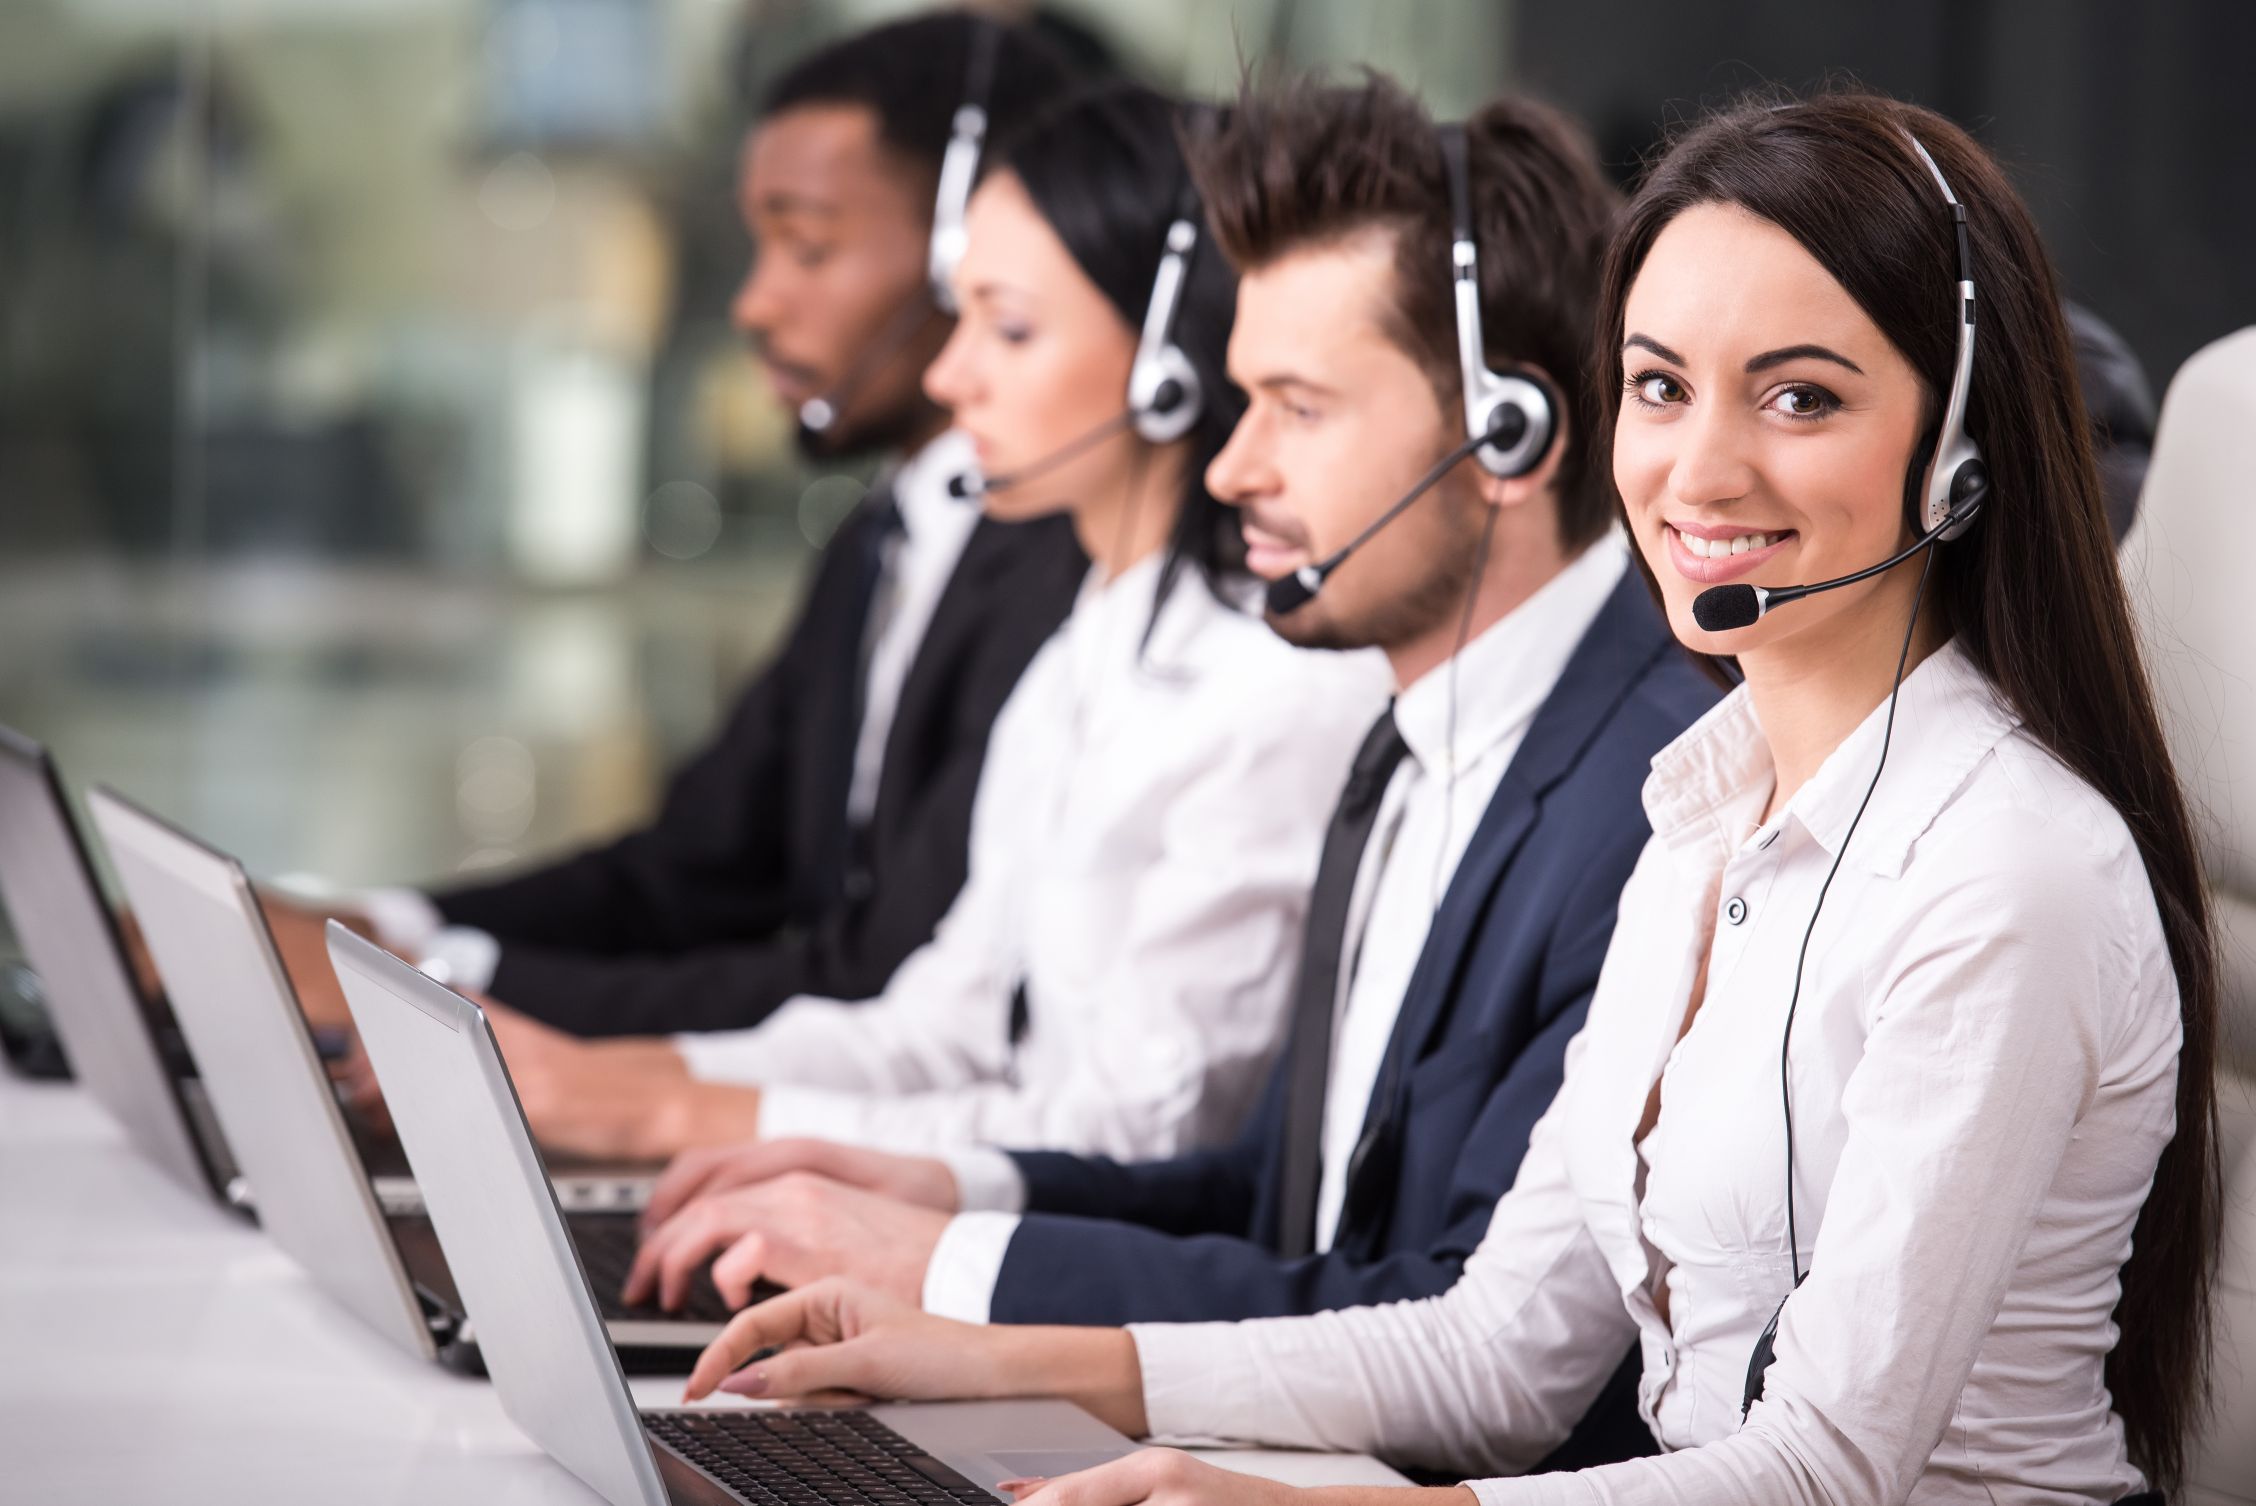 strategic-benefits-of-acquiring-order-taking-call-center-services